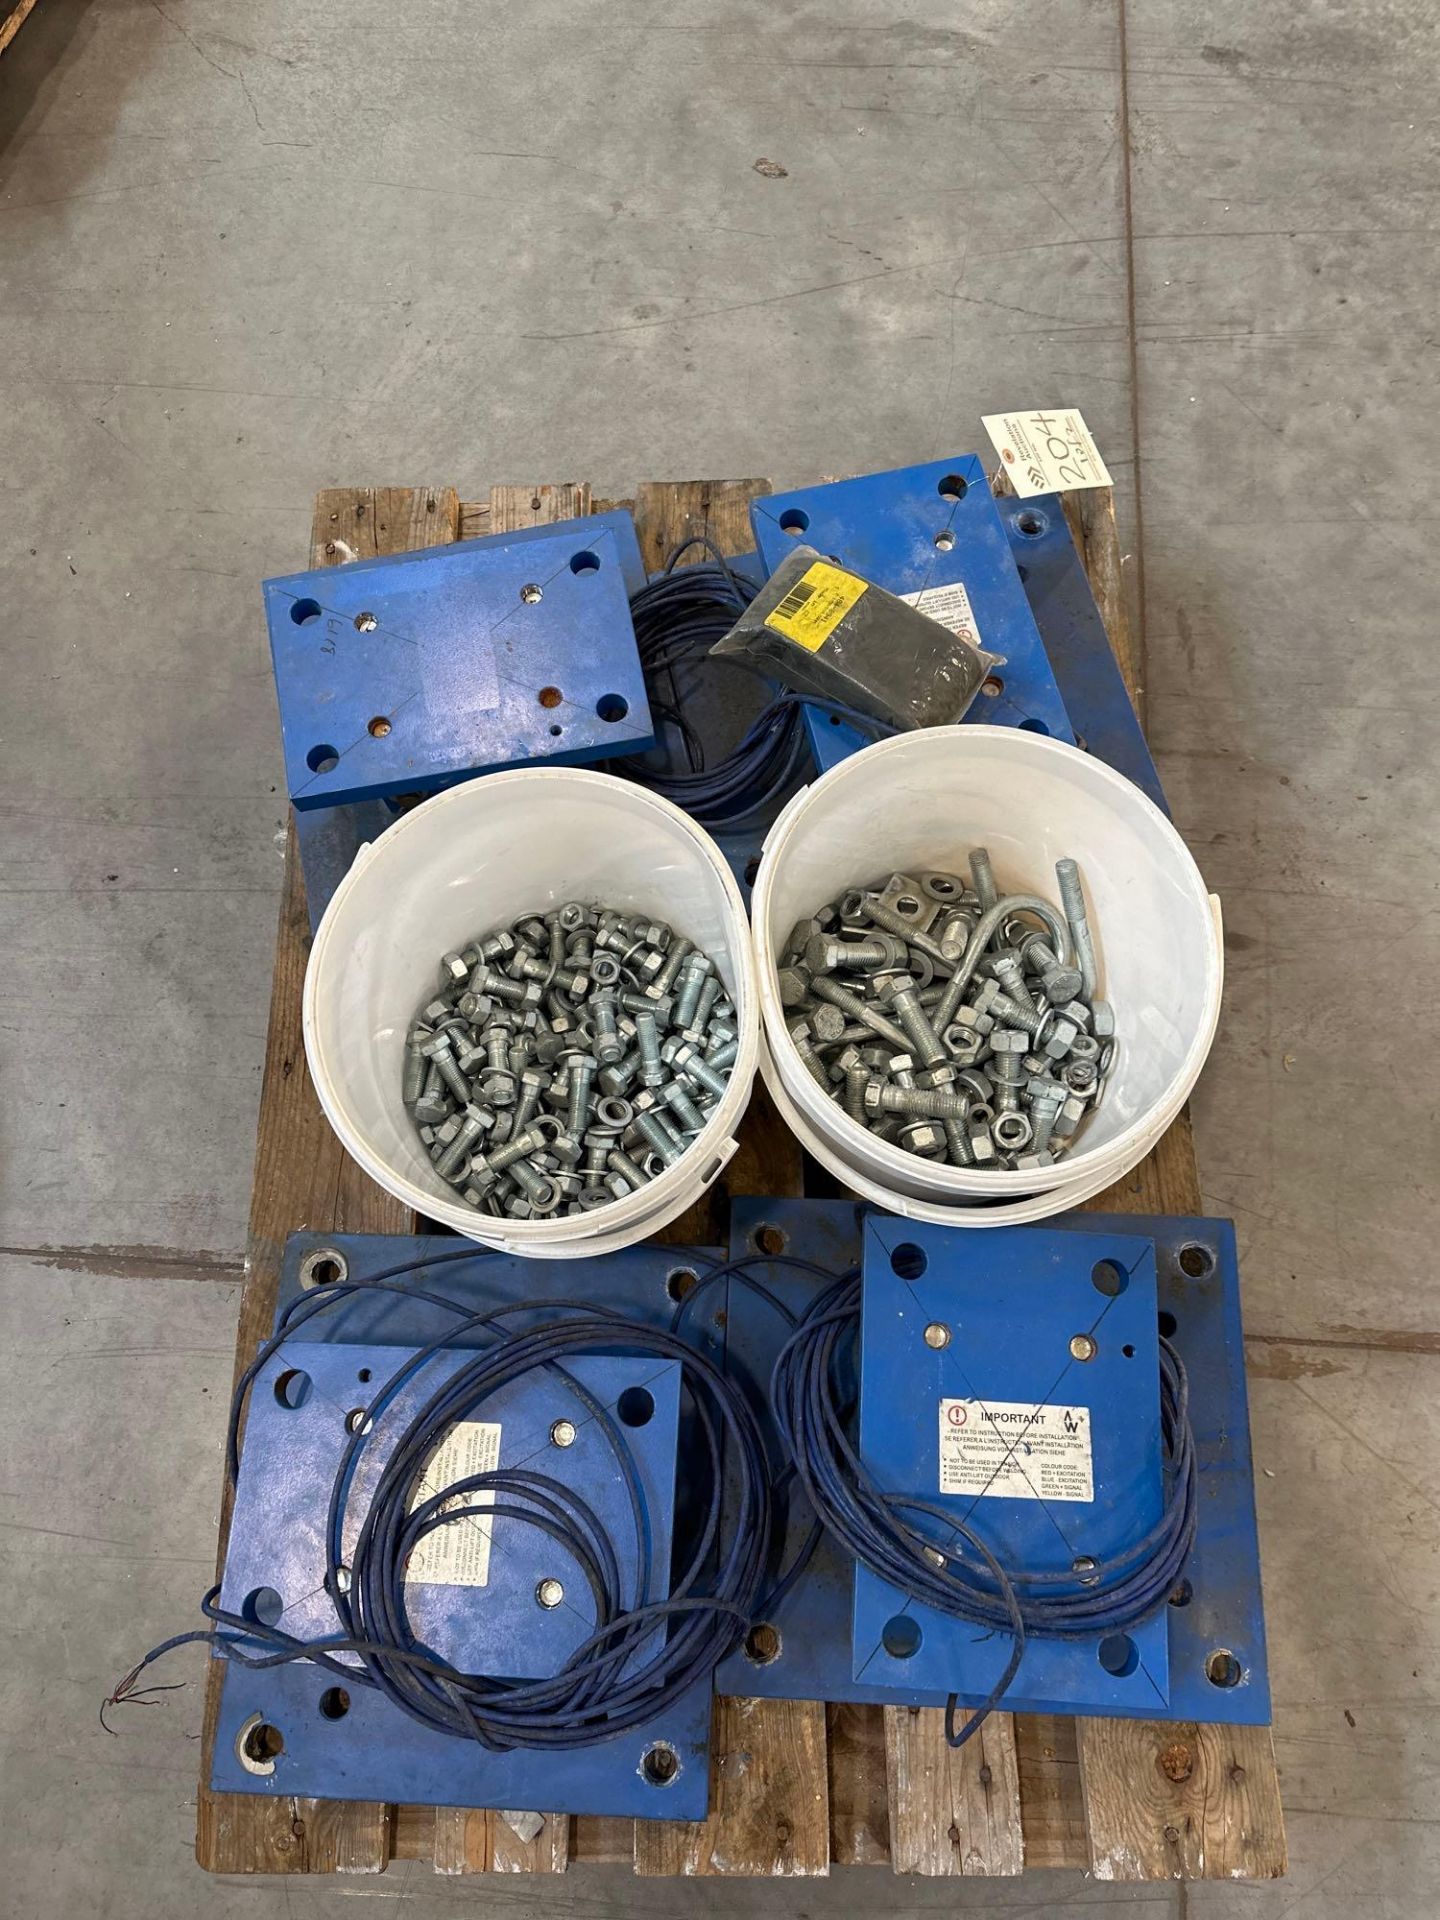 APPLIED WEIGHING INTERNATIONAL LTD. LOAD CELLS W/ CONTROLS - Image 4 of 8